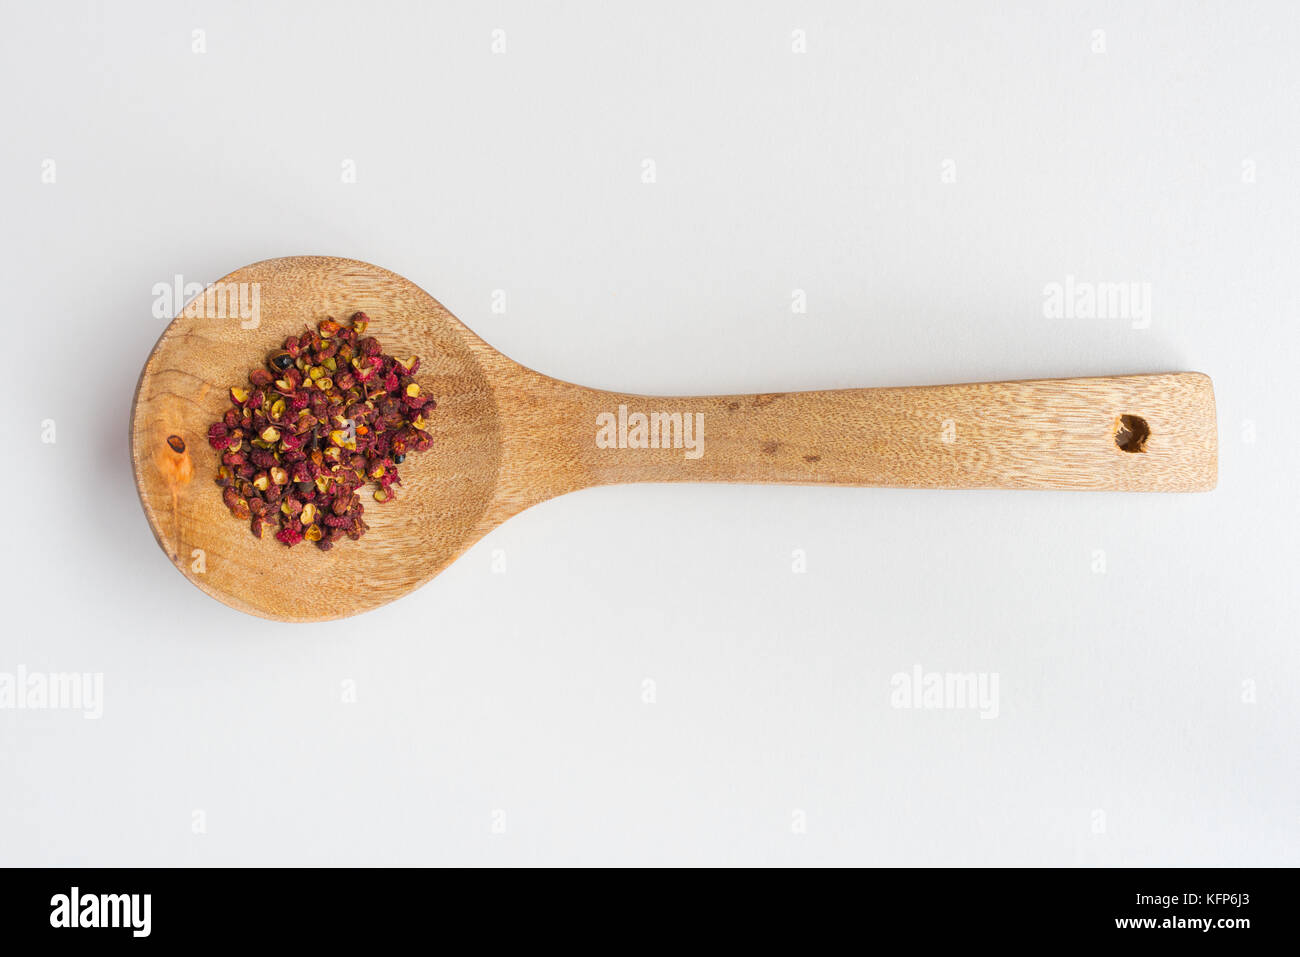 Sichuan red peppercorn in a wood spoon Stock Photo